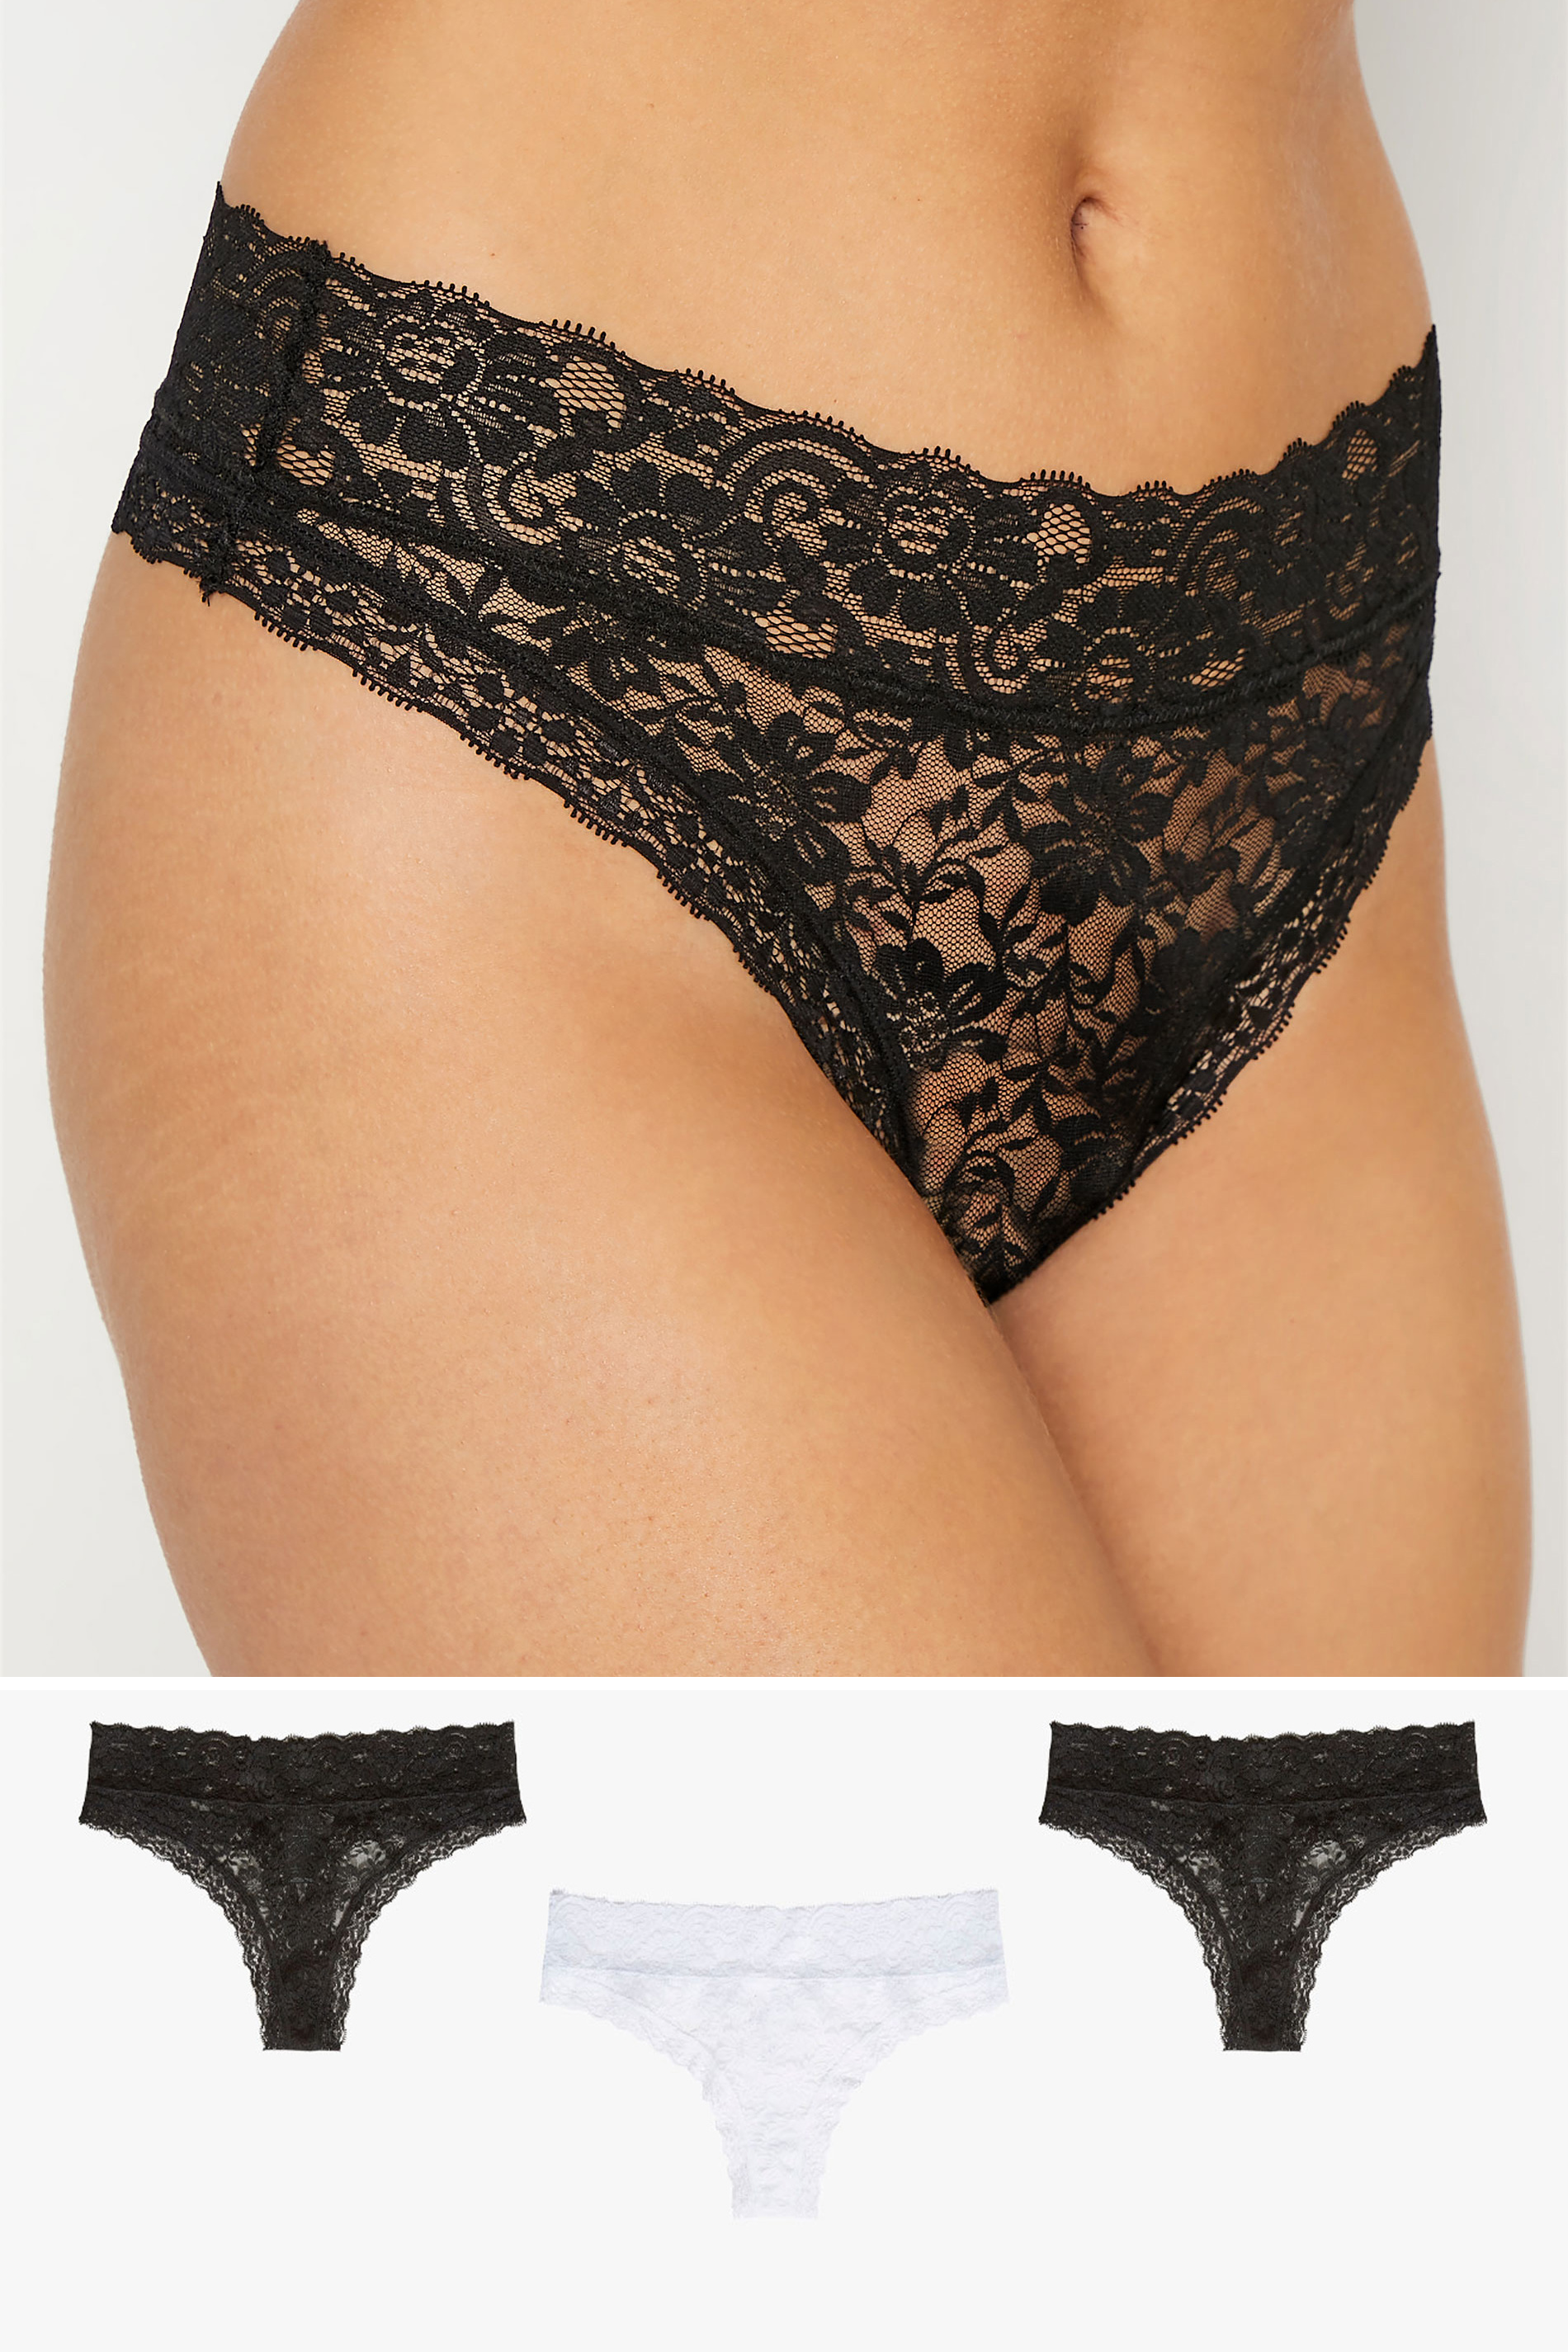 LTS Tall Women's 3 Pack Black & White Floral Lace Thongs | Long Tall Sally 1